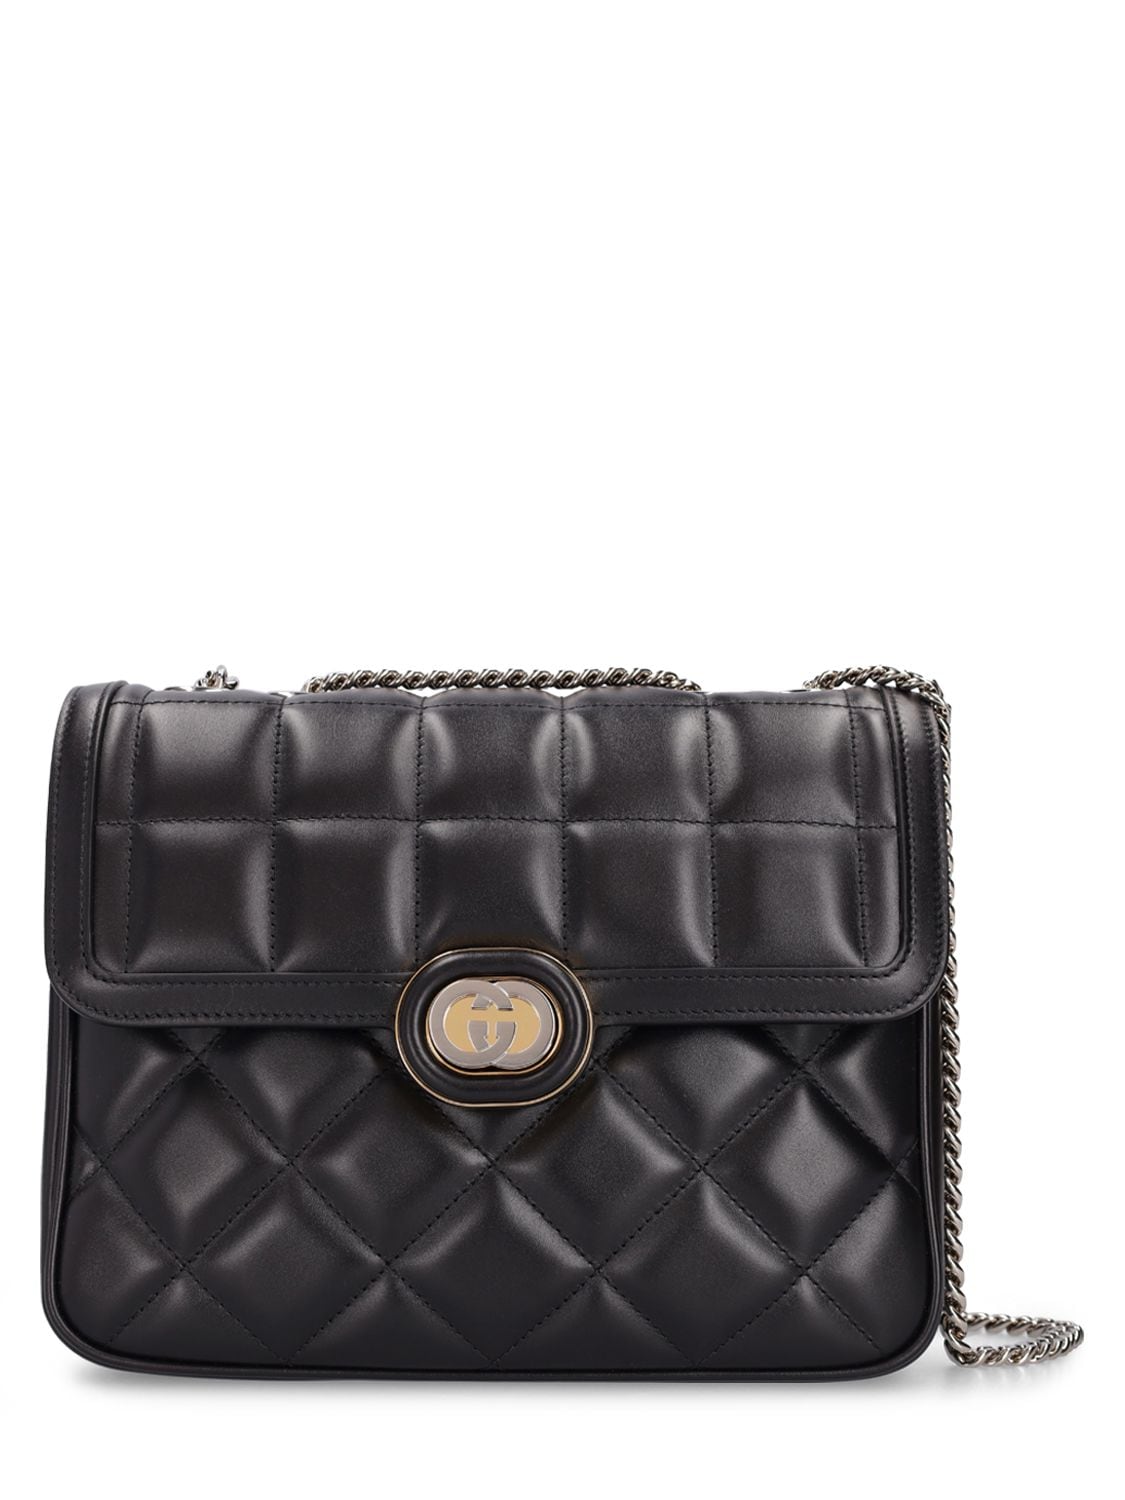 Gucci Deco Quilted Leather Shoulder Bag In Black